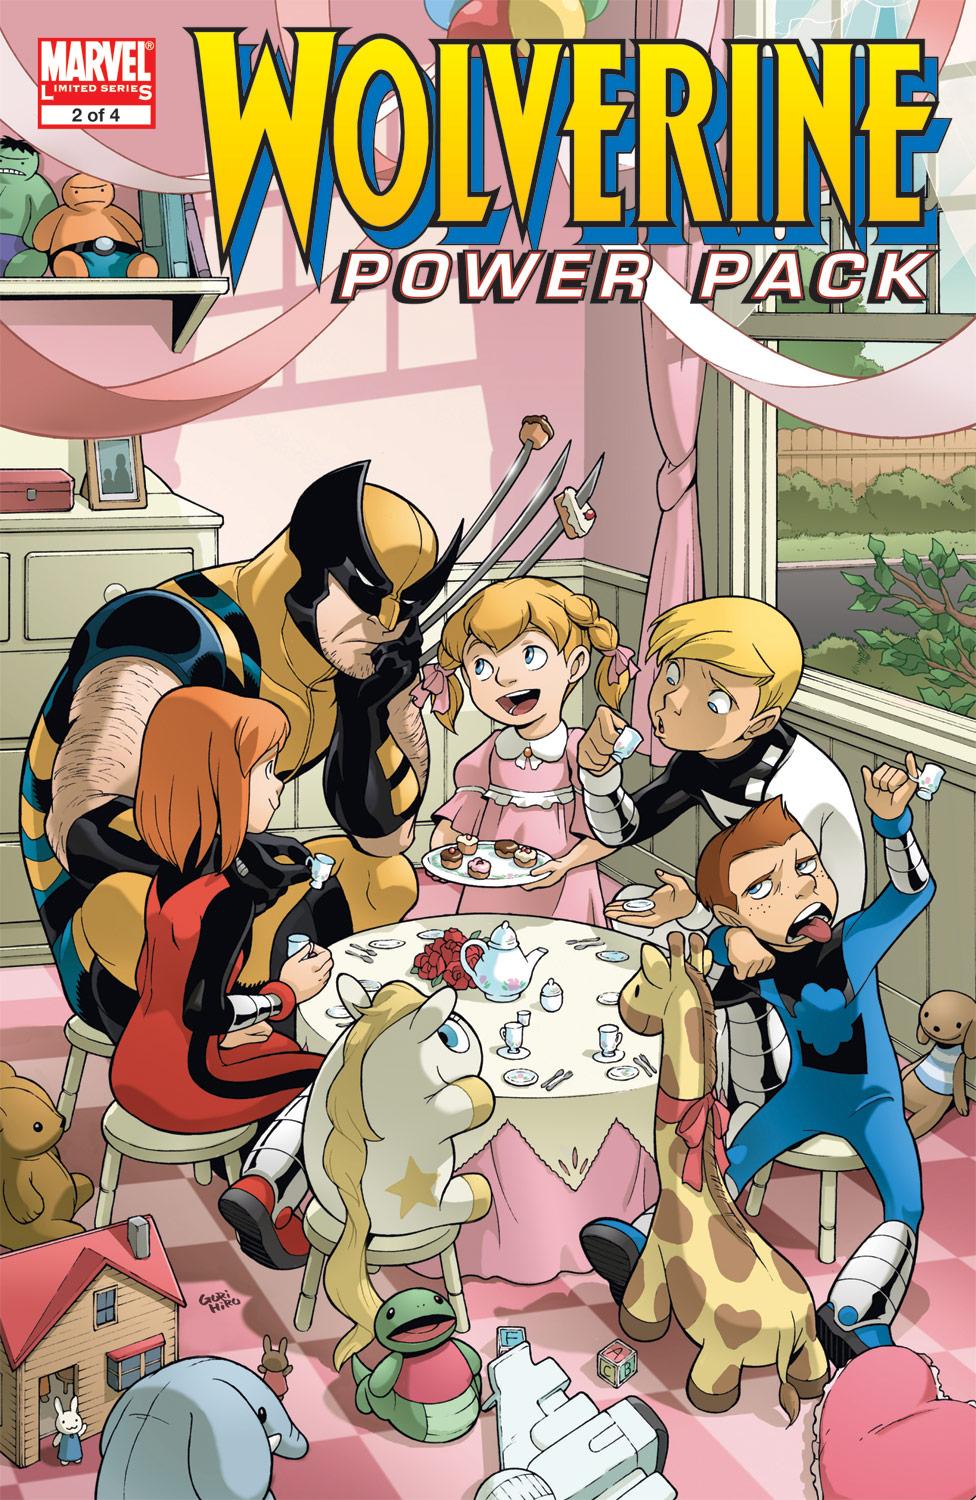 Wolverine and Power Pack (2008) #2